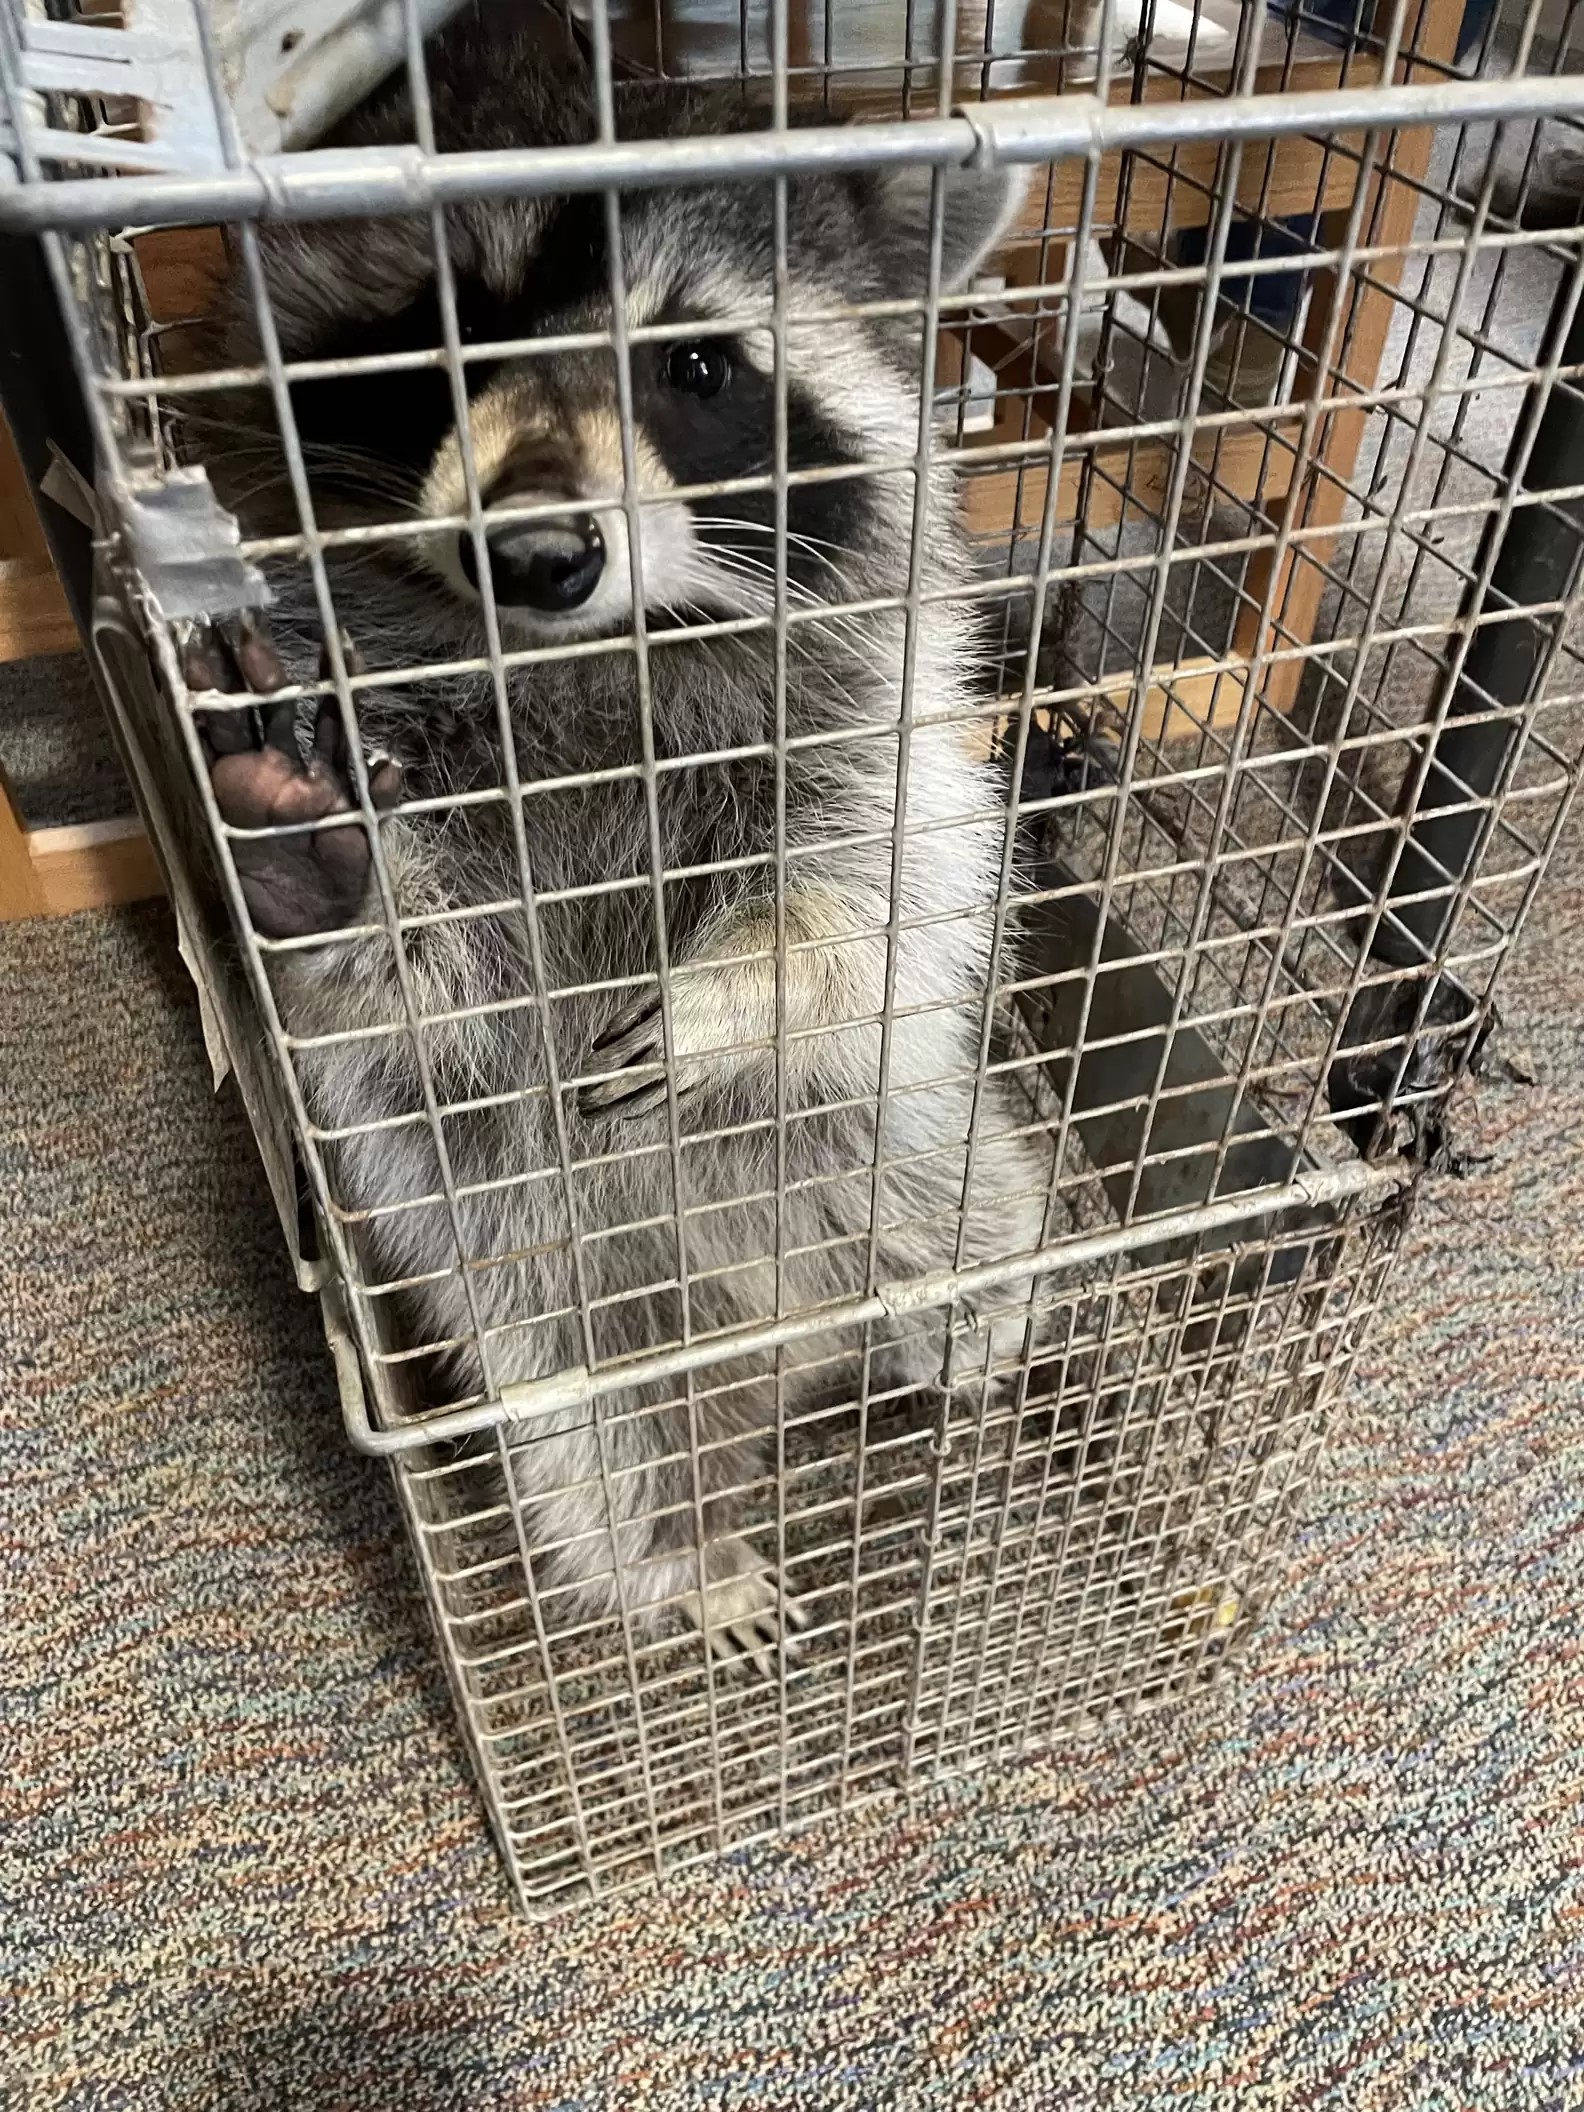 racoon in the cage